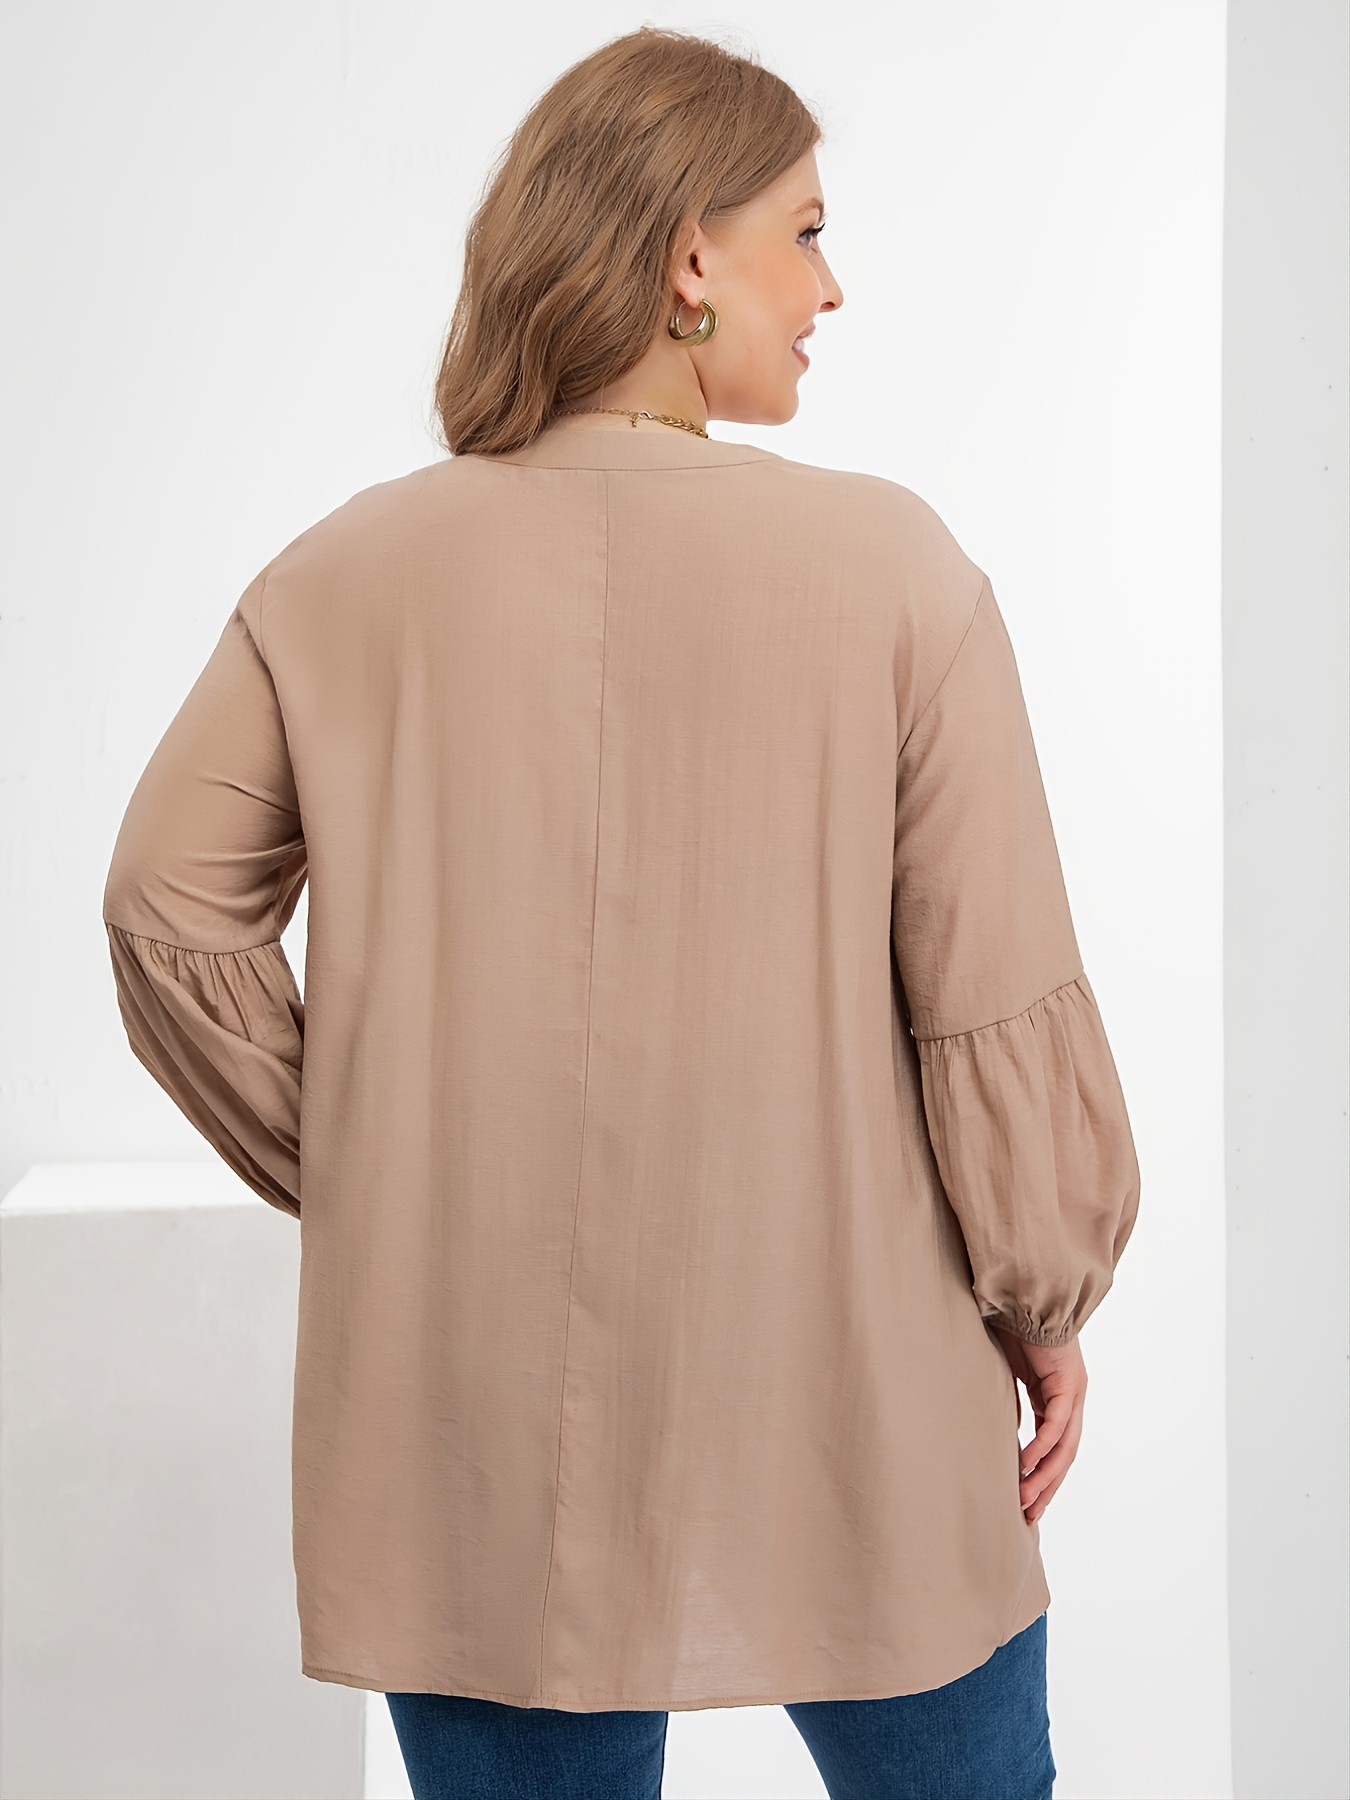 TIYOMI Plus Size Womens 5X Tops Solid Color Long Sleeve Oversized Caramel  Tees Loose fit Shirts Fall Winter Tunic 5XL 26W 28W